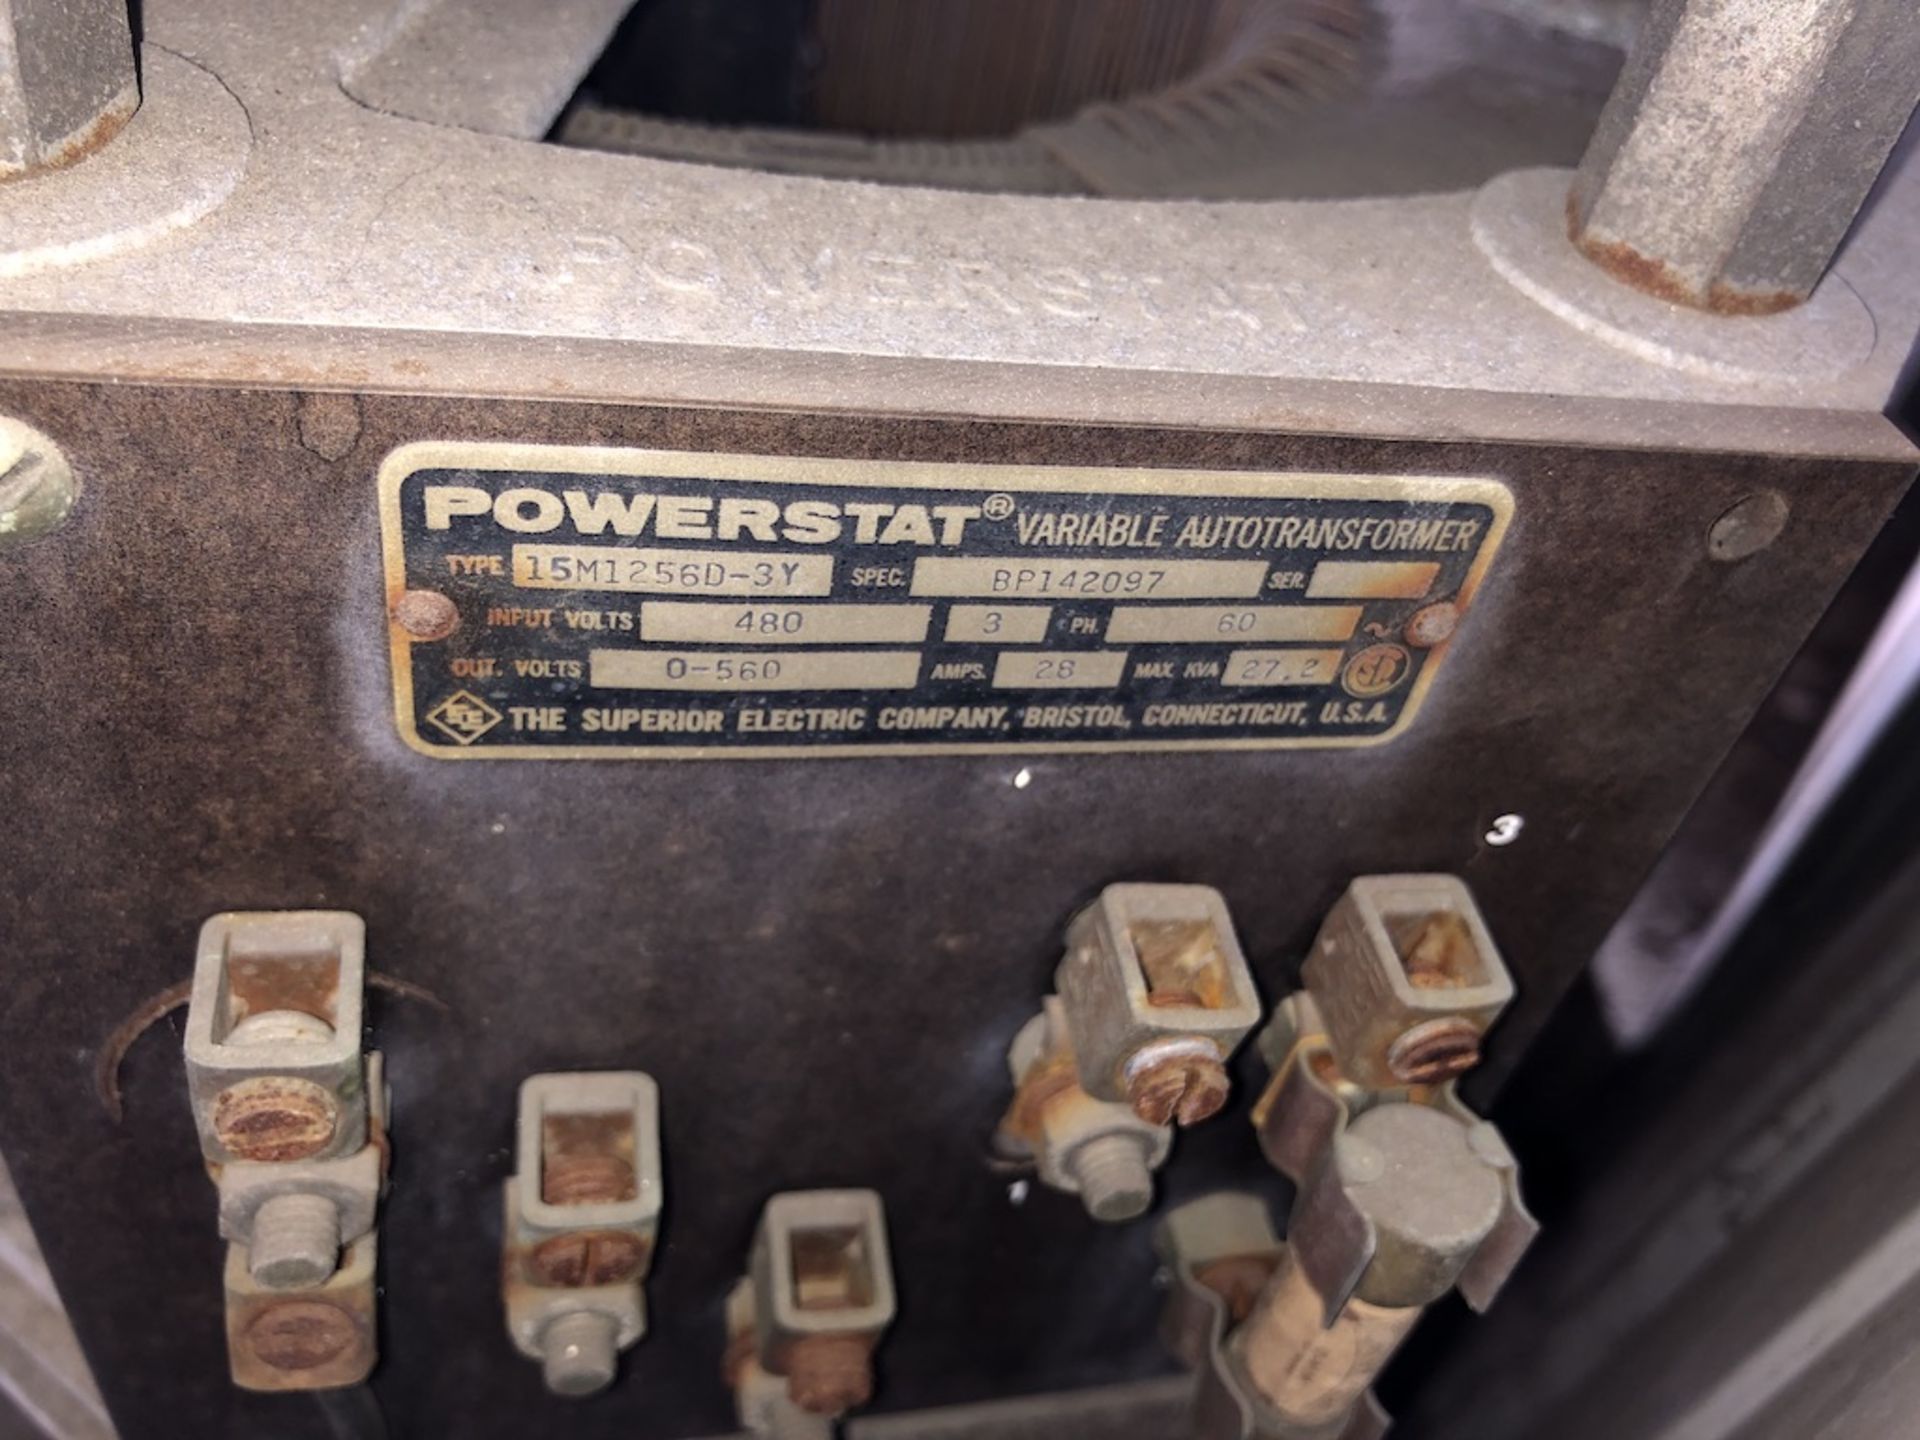 QTY OF 2 ITEMS: POWERSTAT 15M1256D-3Y VARIABLE AUTOTRANSFORMER INPUT VOLTS: 480, PHASE 3; FURNANCE - Image 4 of 4